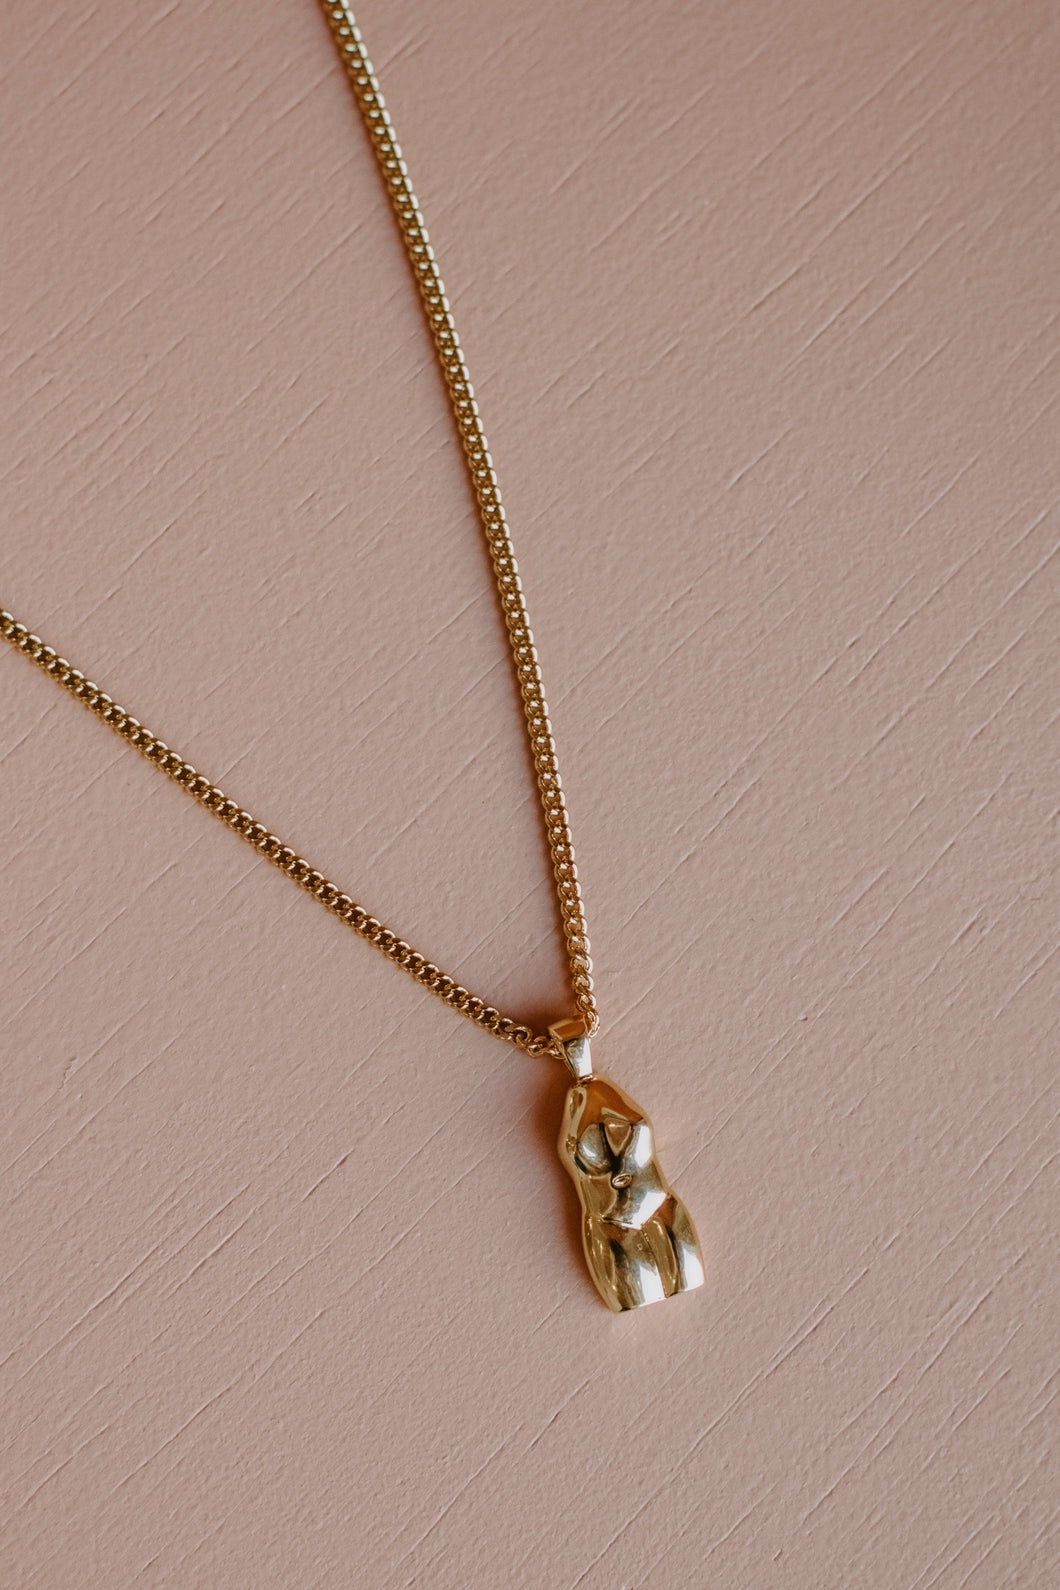 Gold Female Form Necklace